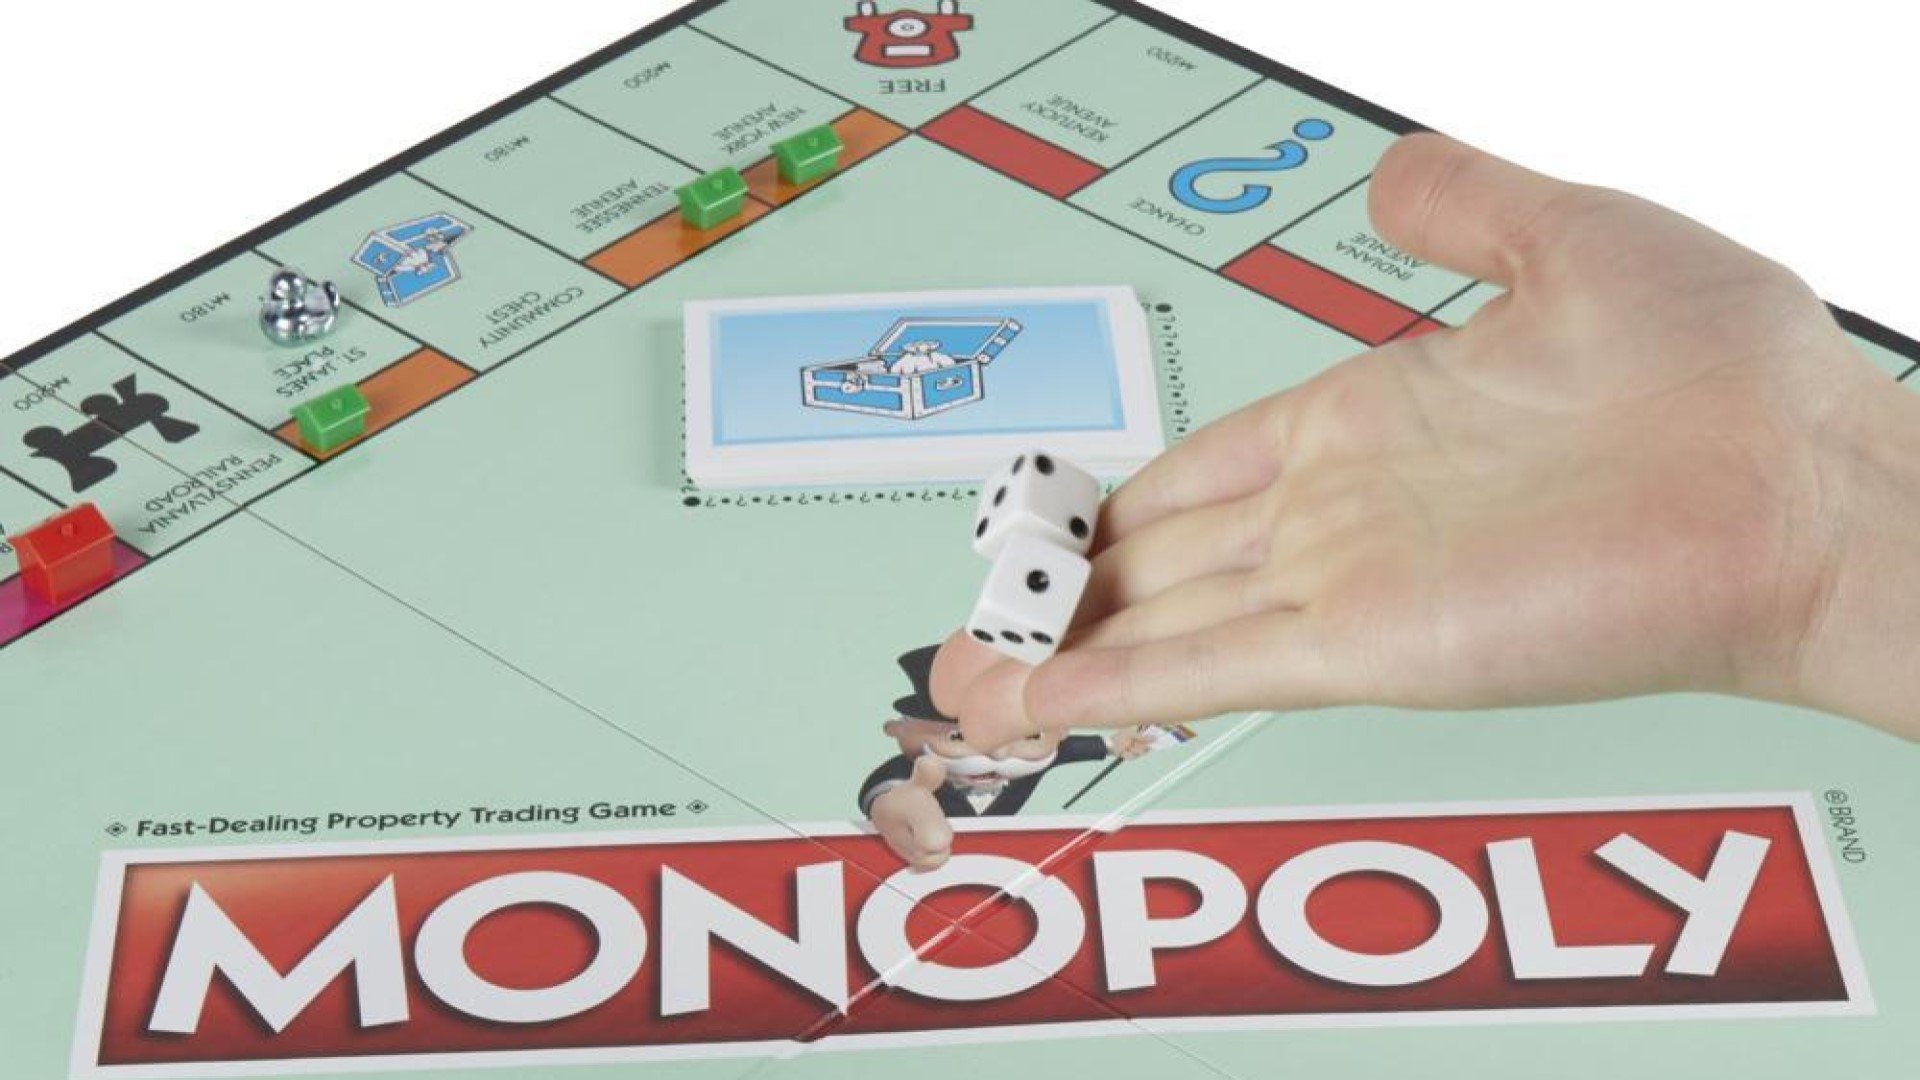 Monopoly, a hand rolling dice on a monopoly board.